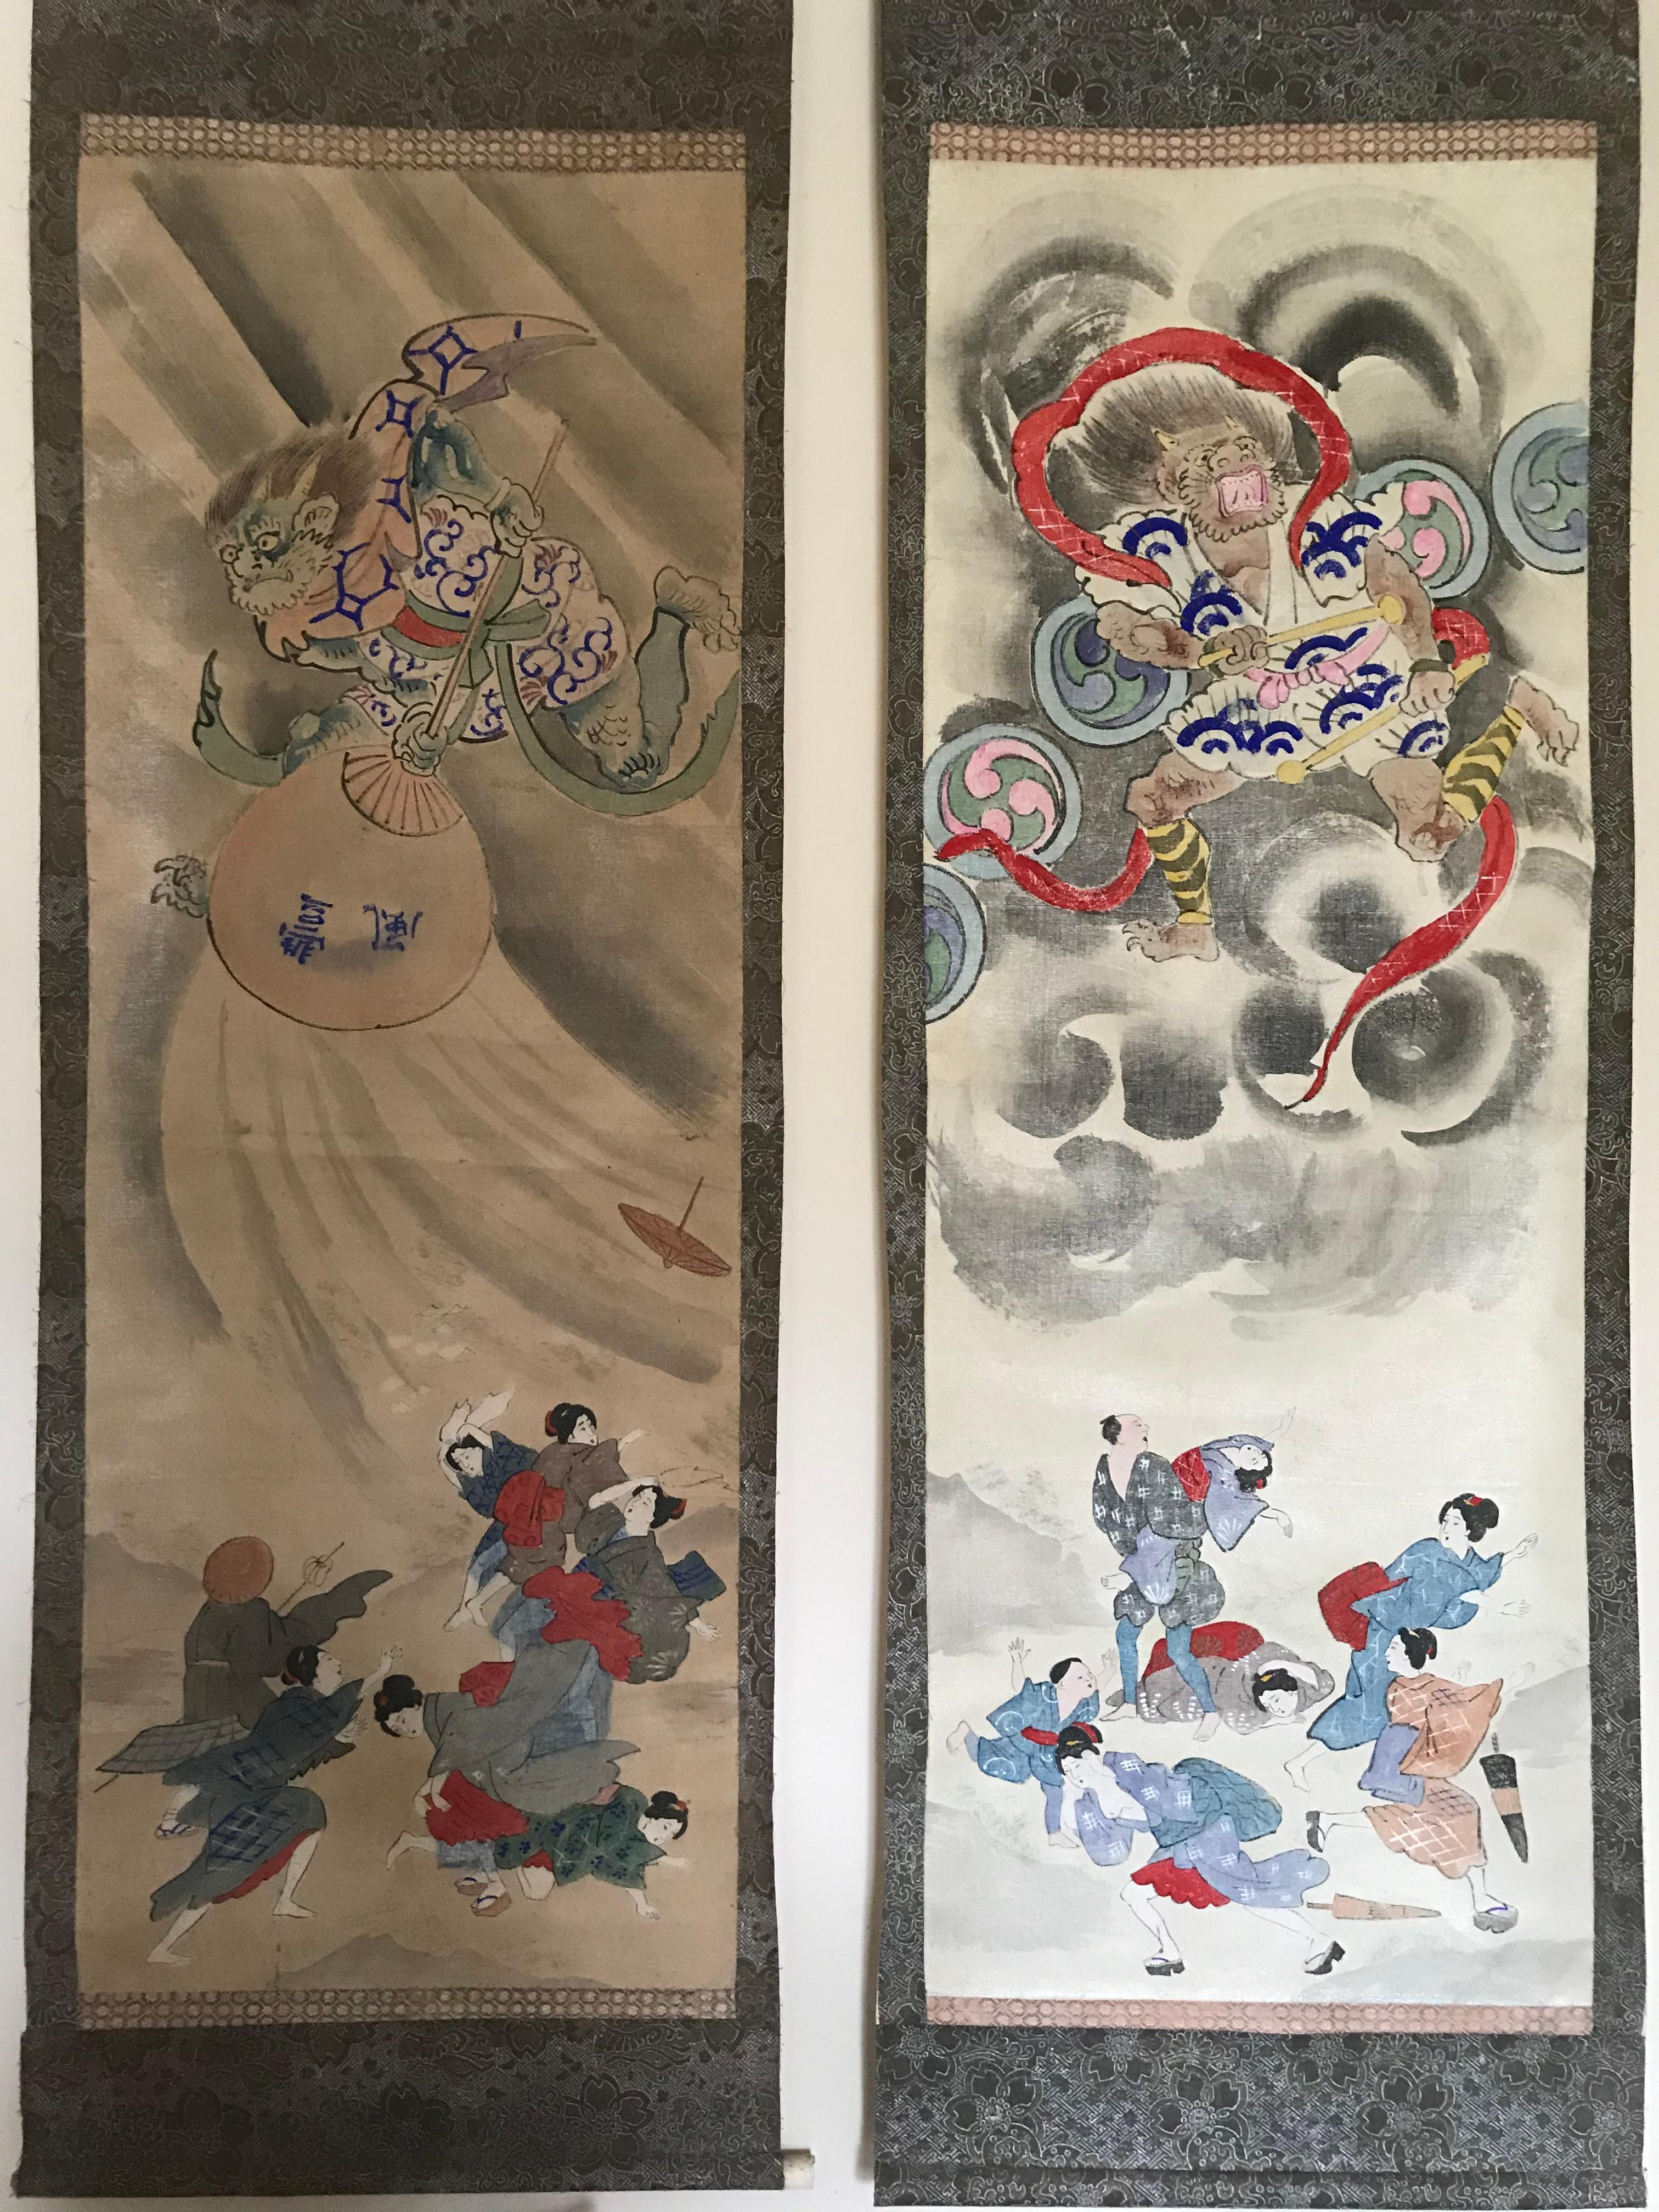 Beautiful set of 6 large kakemonos from 19th century Japanese mythology. 
Paper support with a canvas pasted on the paper 
Wonderful set that is part of Japan's history and beliefs
When not hung, the Kakemonos are rolled up.
circa 1800 - Japan -